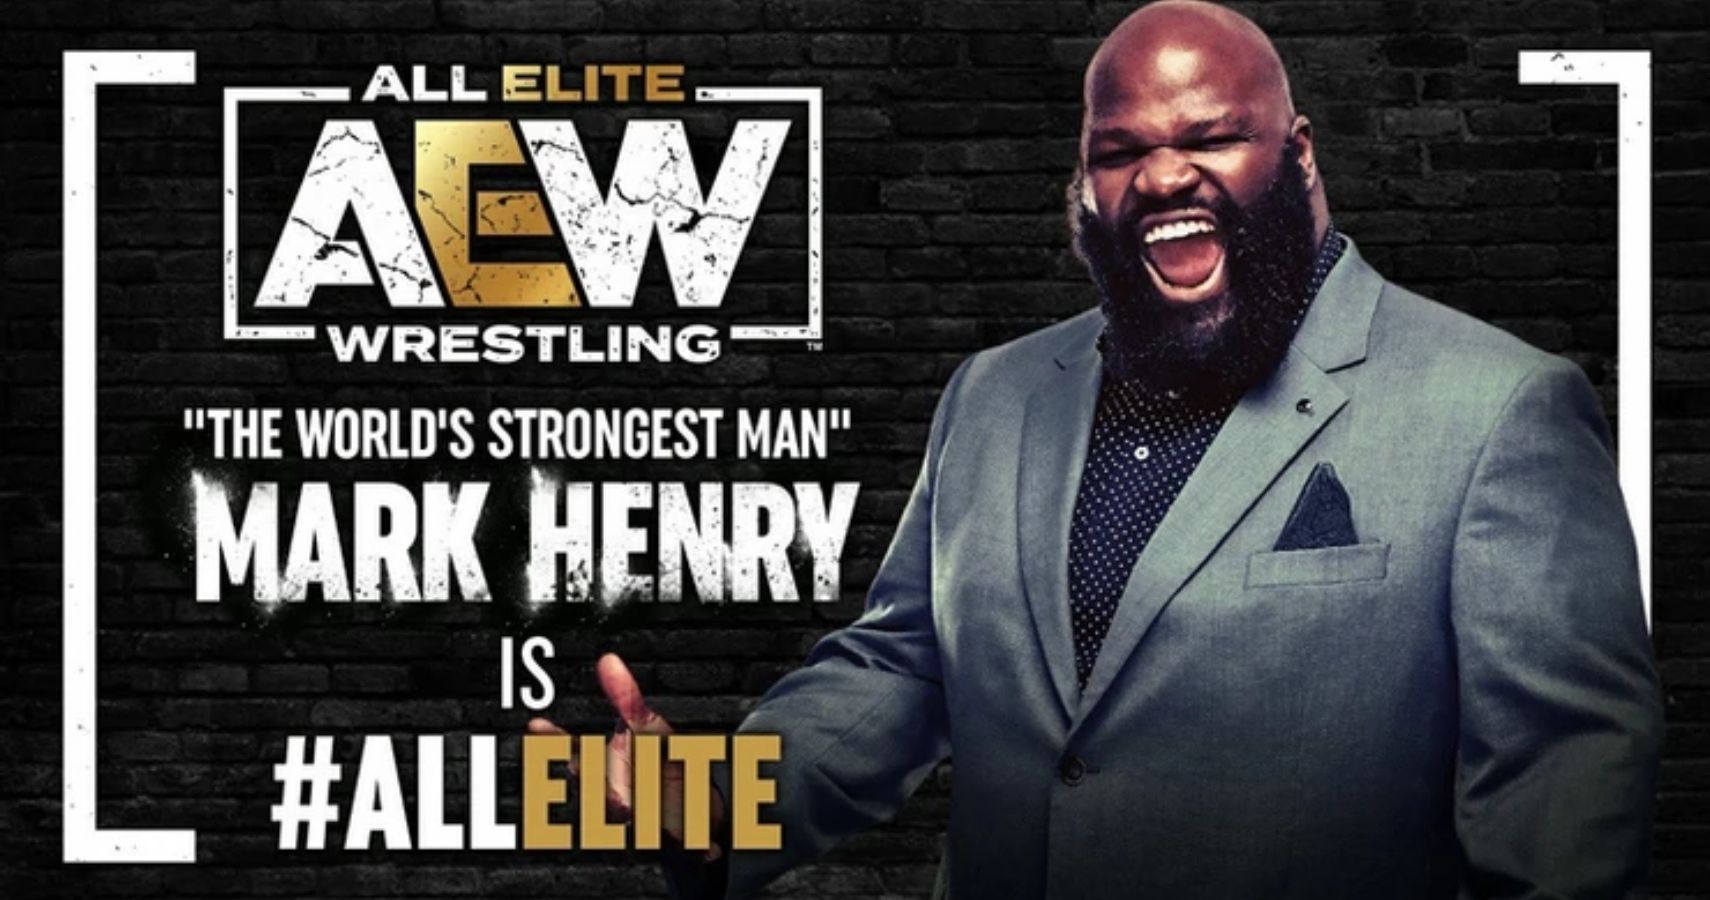 Mark Henry signs with AEW